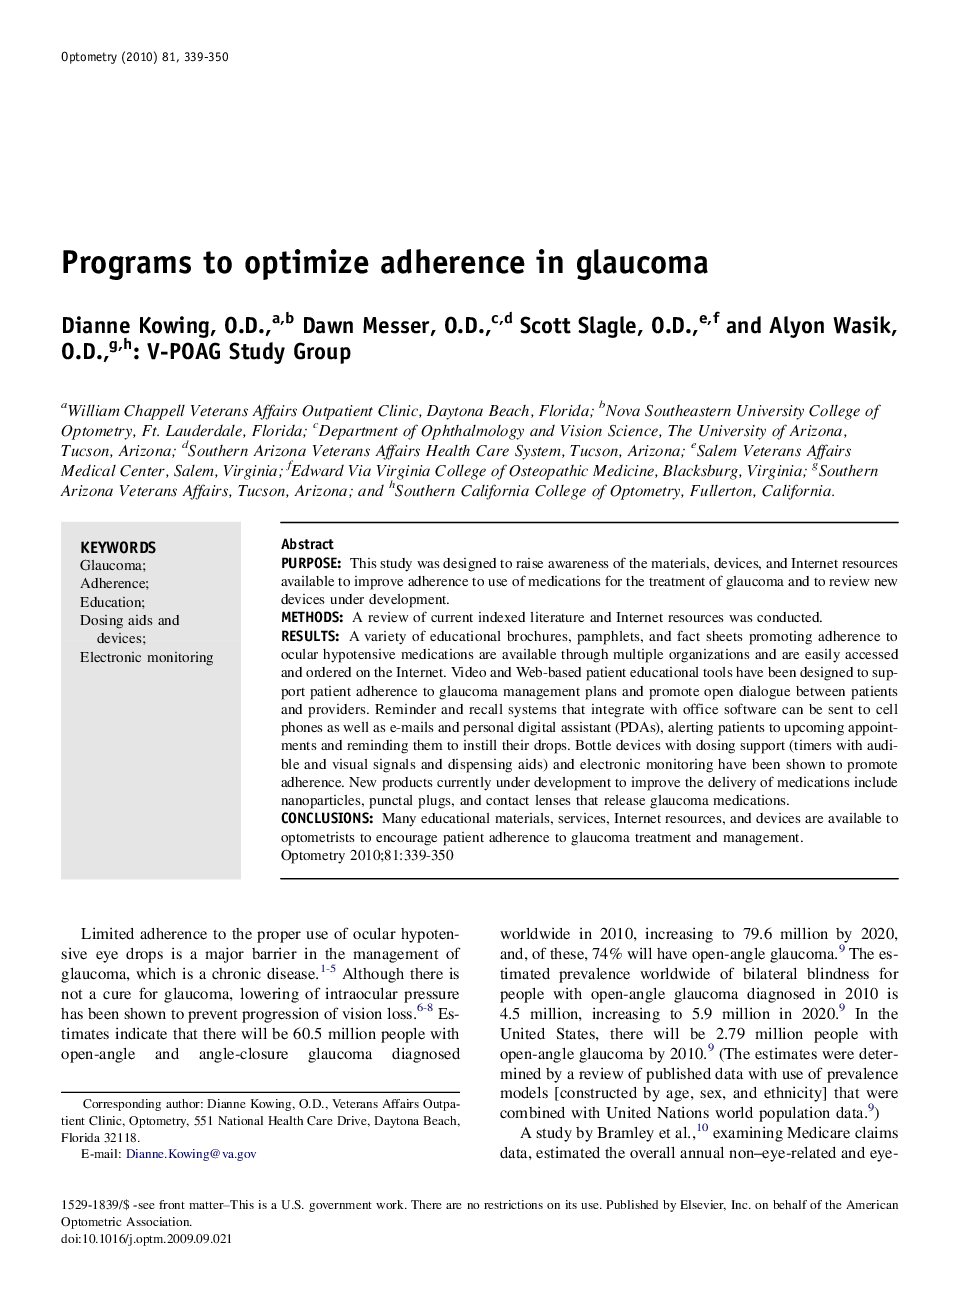 Programs to optimize adherence in glaucoma